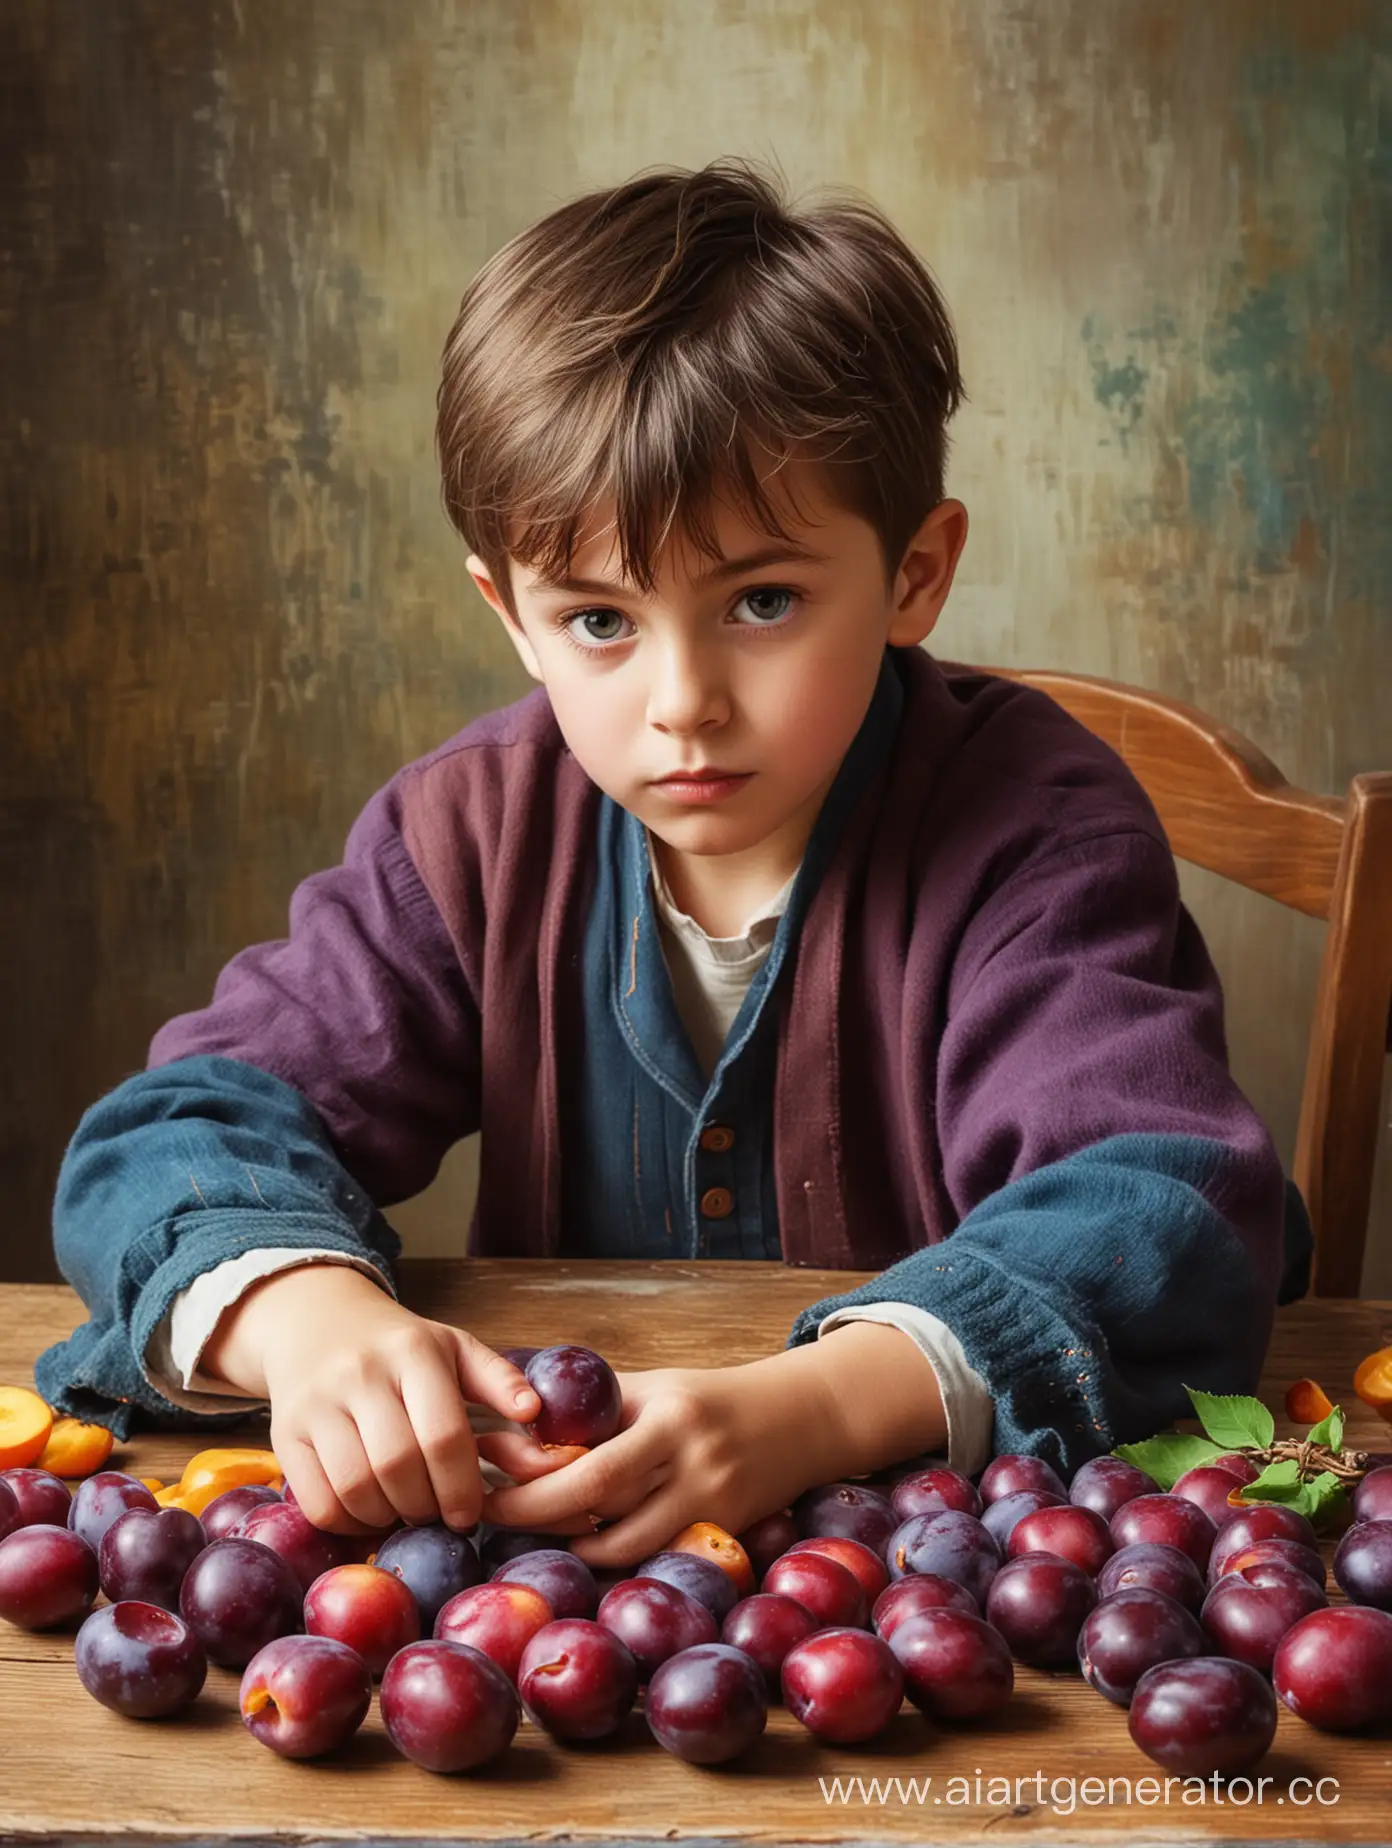 Mischievous-Boy-Stealing-Plums-Vibrant-and-Playful-Scene